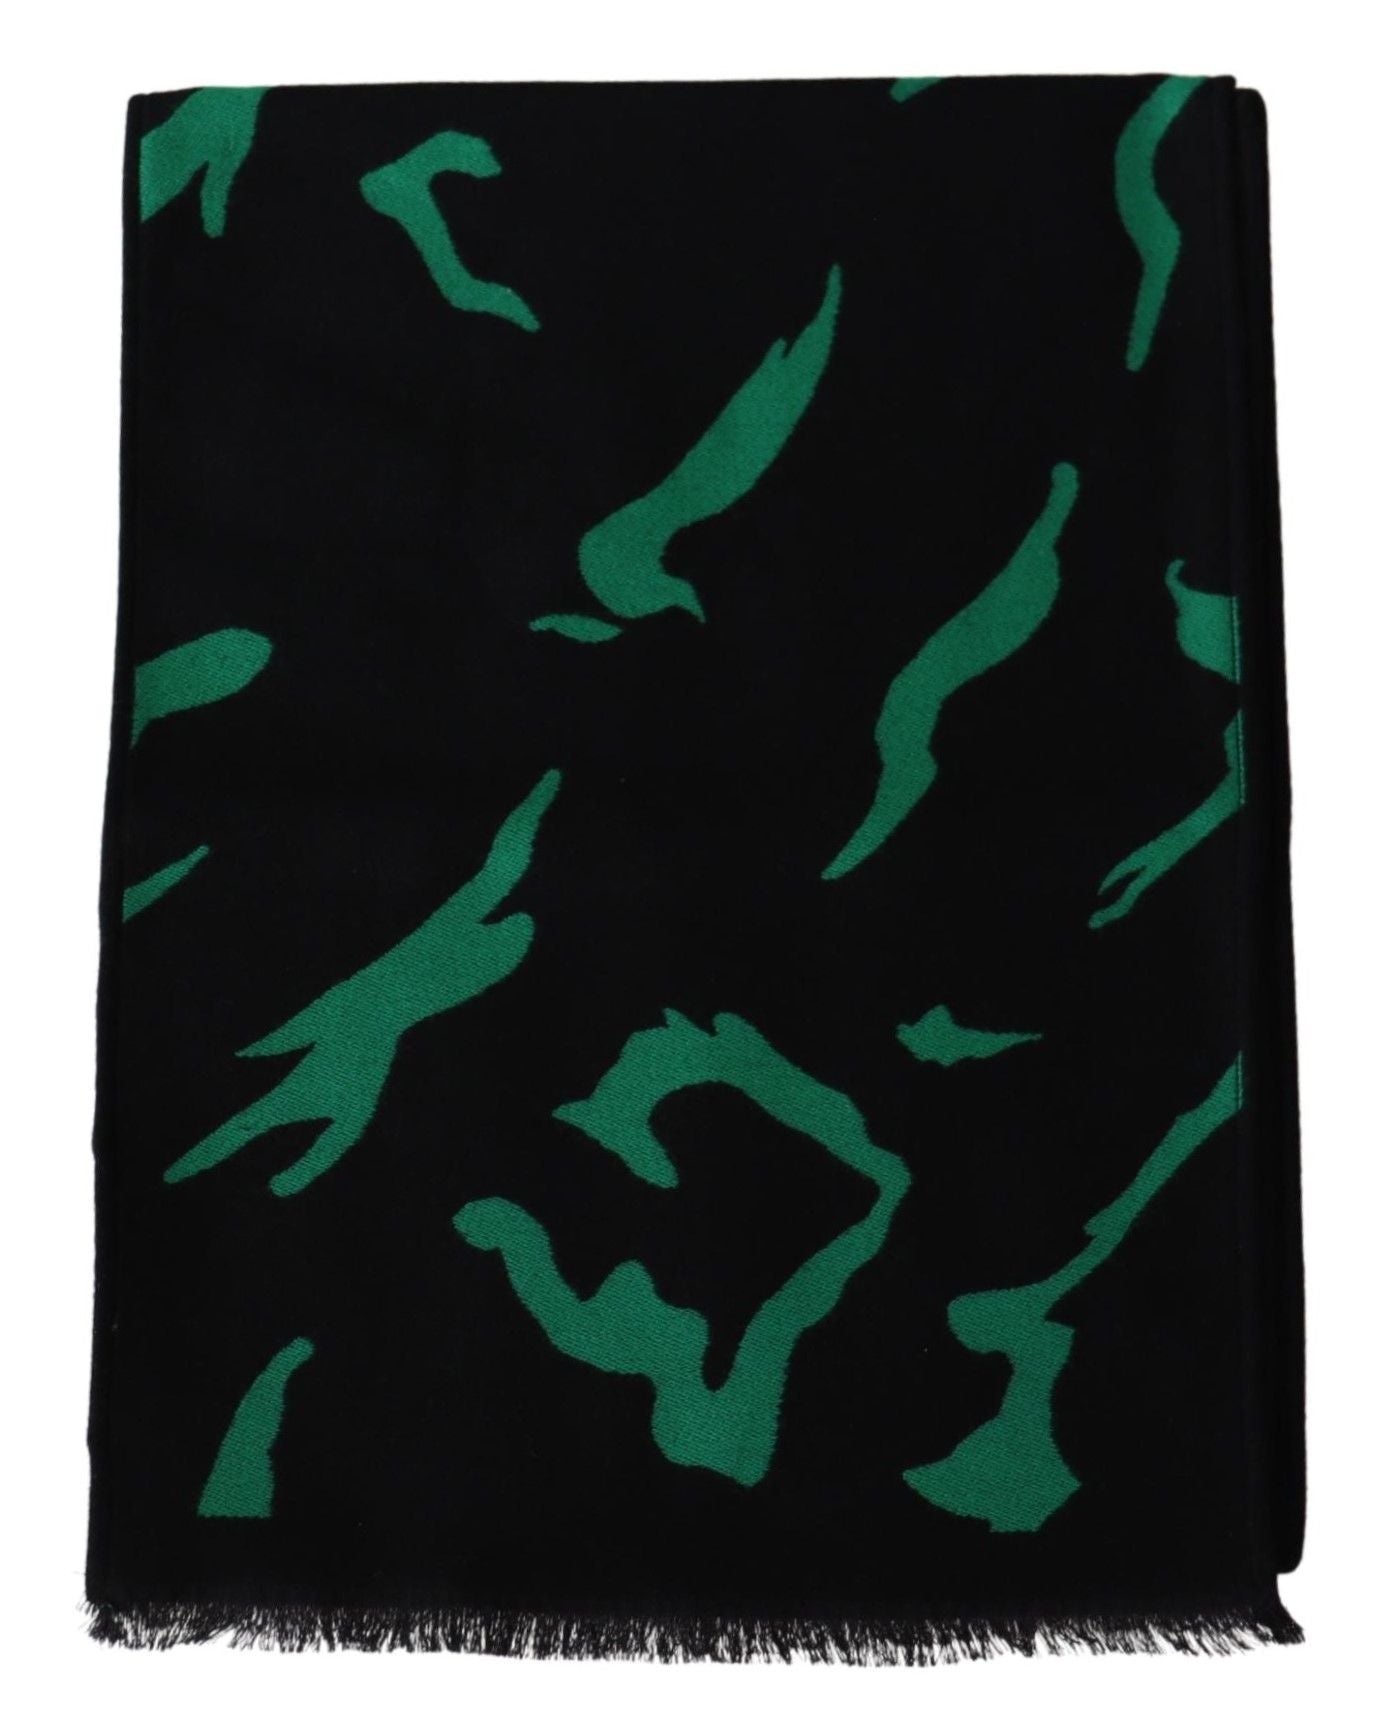 Givenchy Black Green Wool Unisex Winter Warm Scarf Wrap Shawl - Designed by Givenchy Available to Buy at a Discounted Price on Moon Behind The Hill Online Designer Discount Store